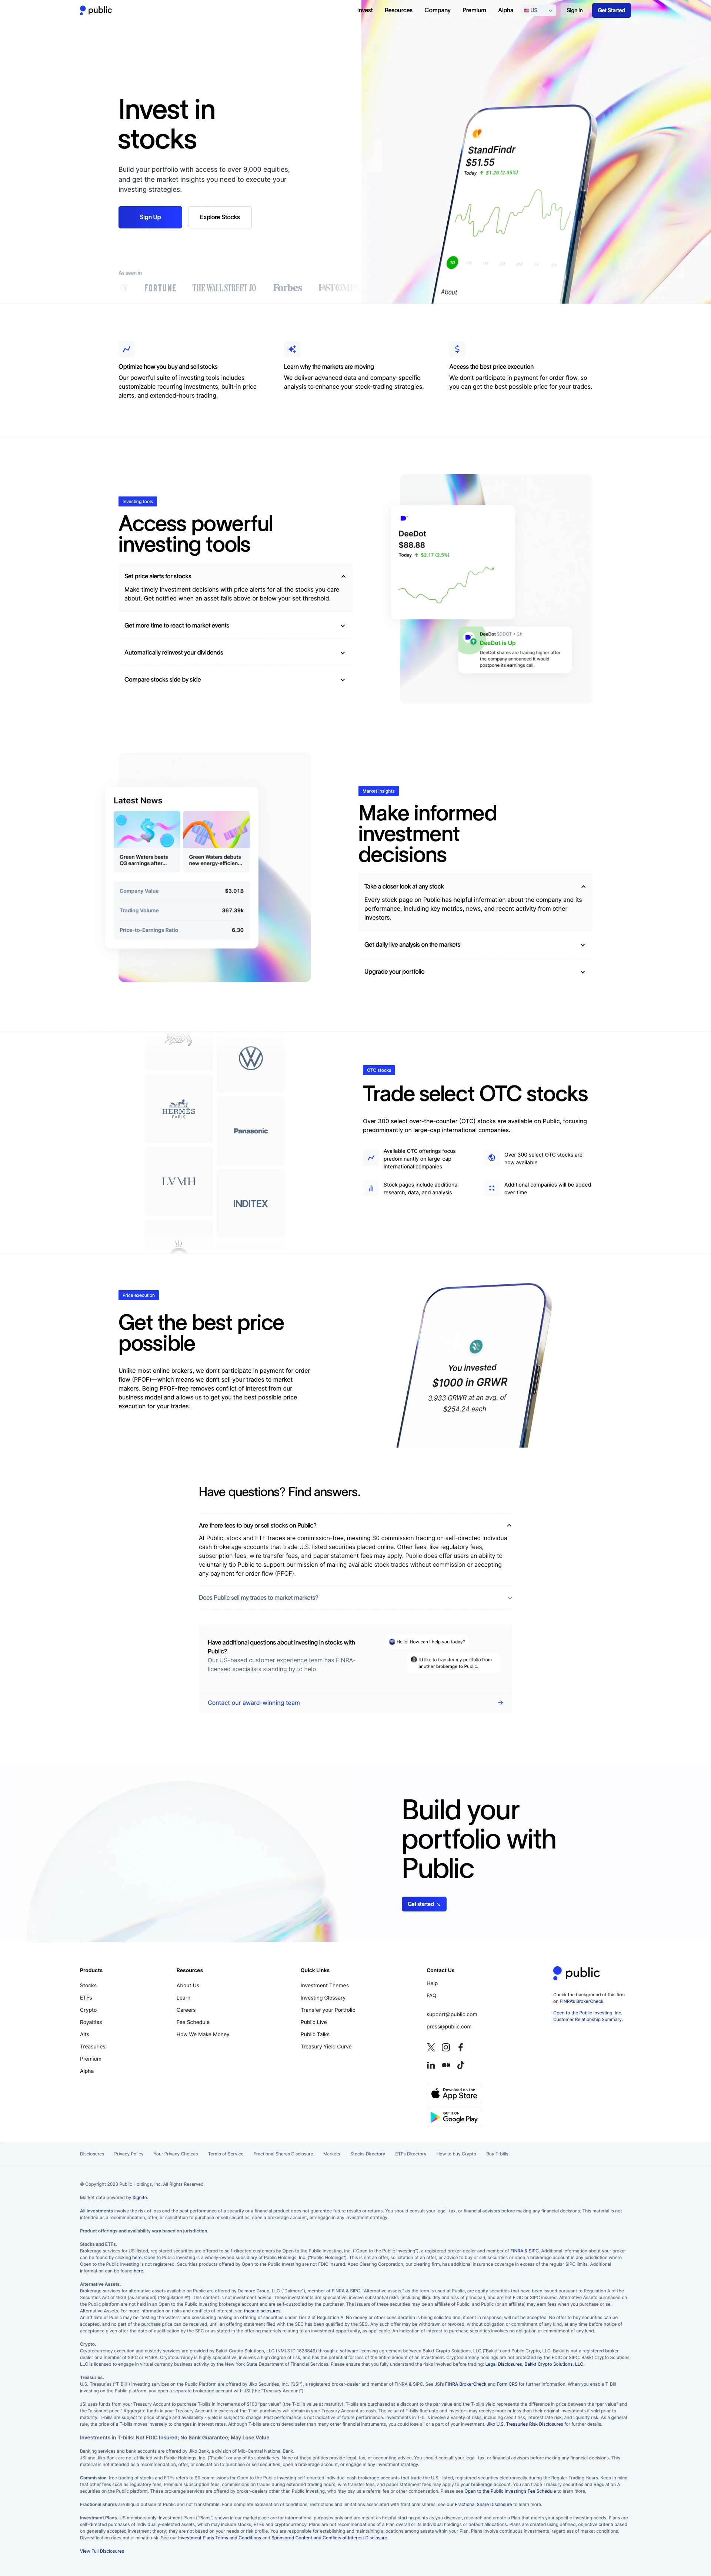 Public Landing Page Example: One place for all your investing. Invest in 9,000+ equities and get the insights that matter with real-time data, live audio shows, and reporting tailored to your portfolio.